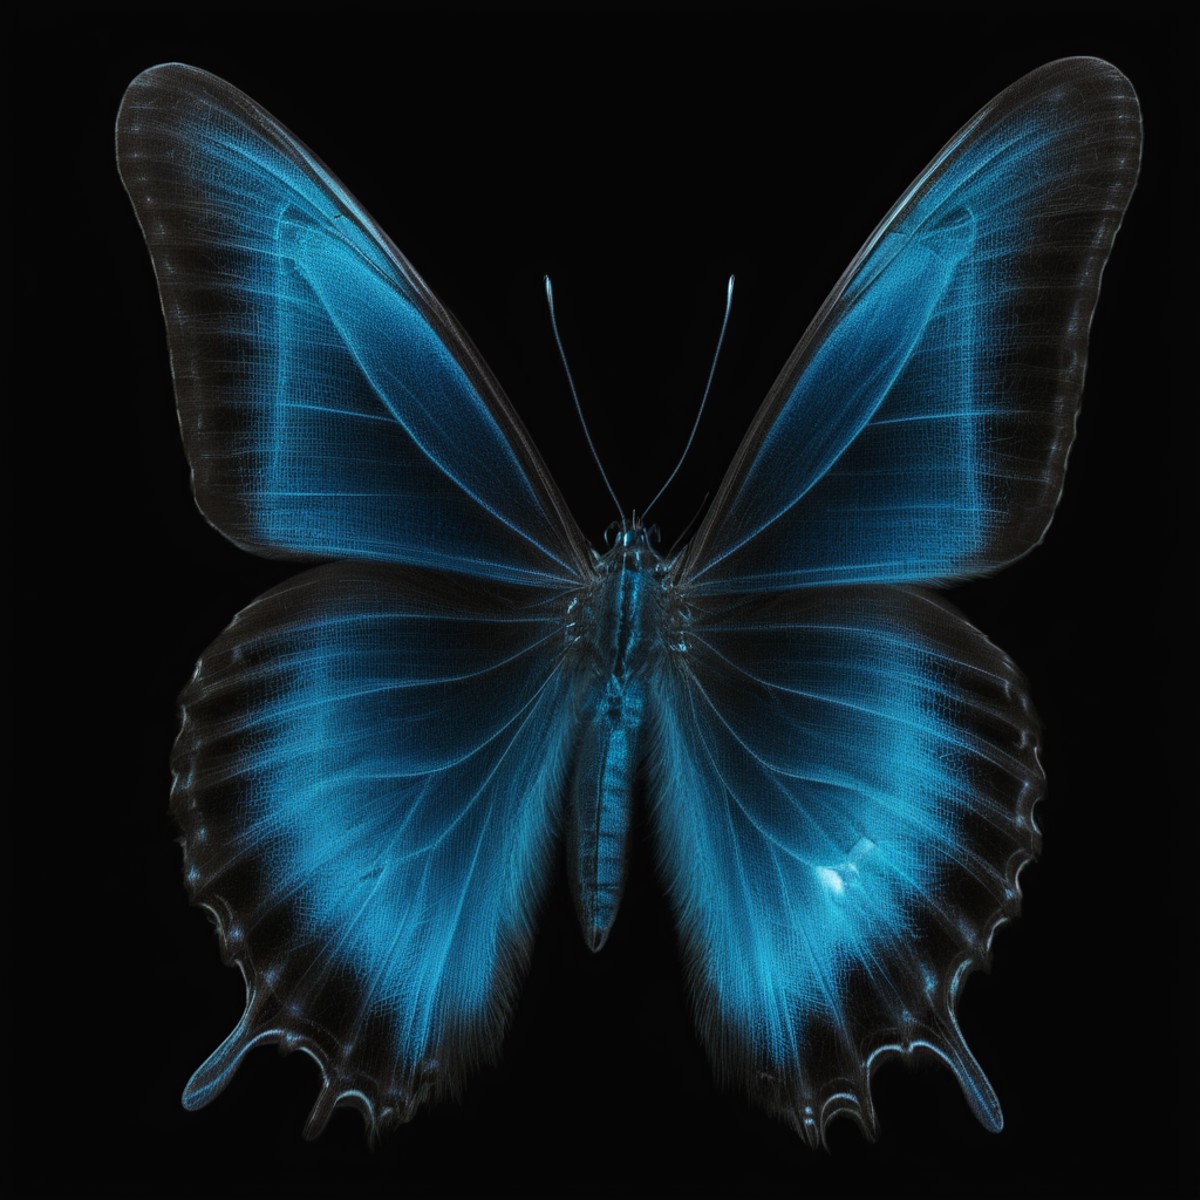 cinematic film still of  <lora:x-ray style:1> X-ray of
a butterfly with a blue wing on a black background,x-ray style, sha...